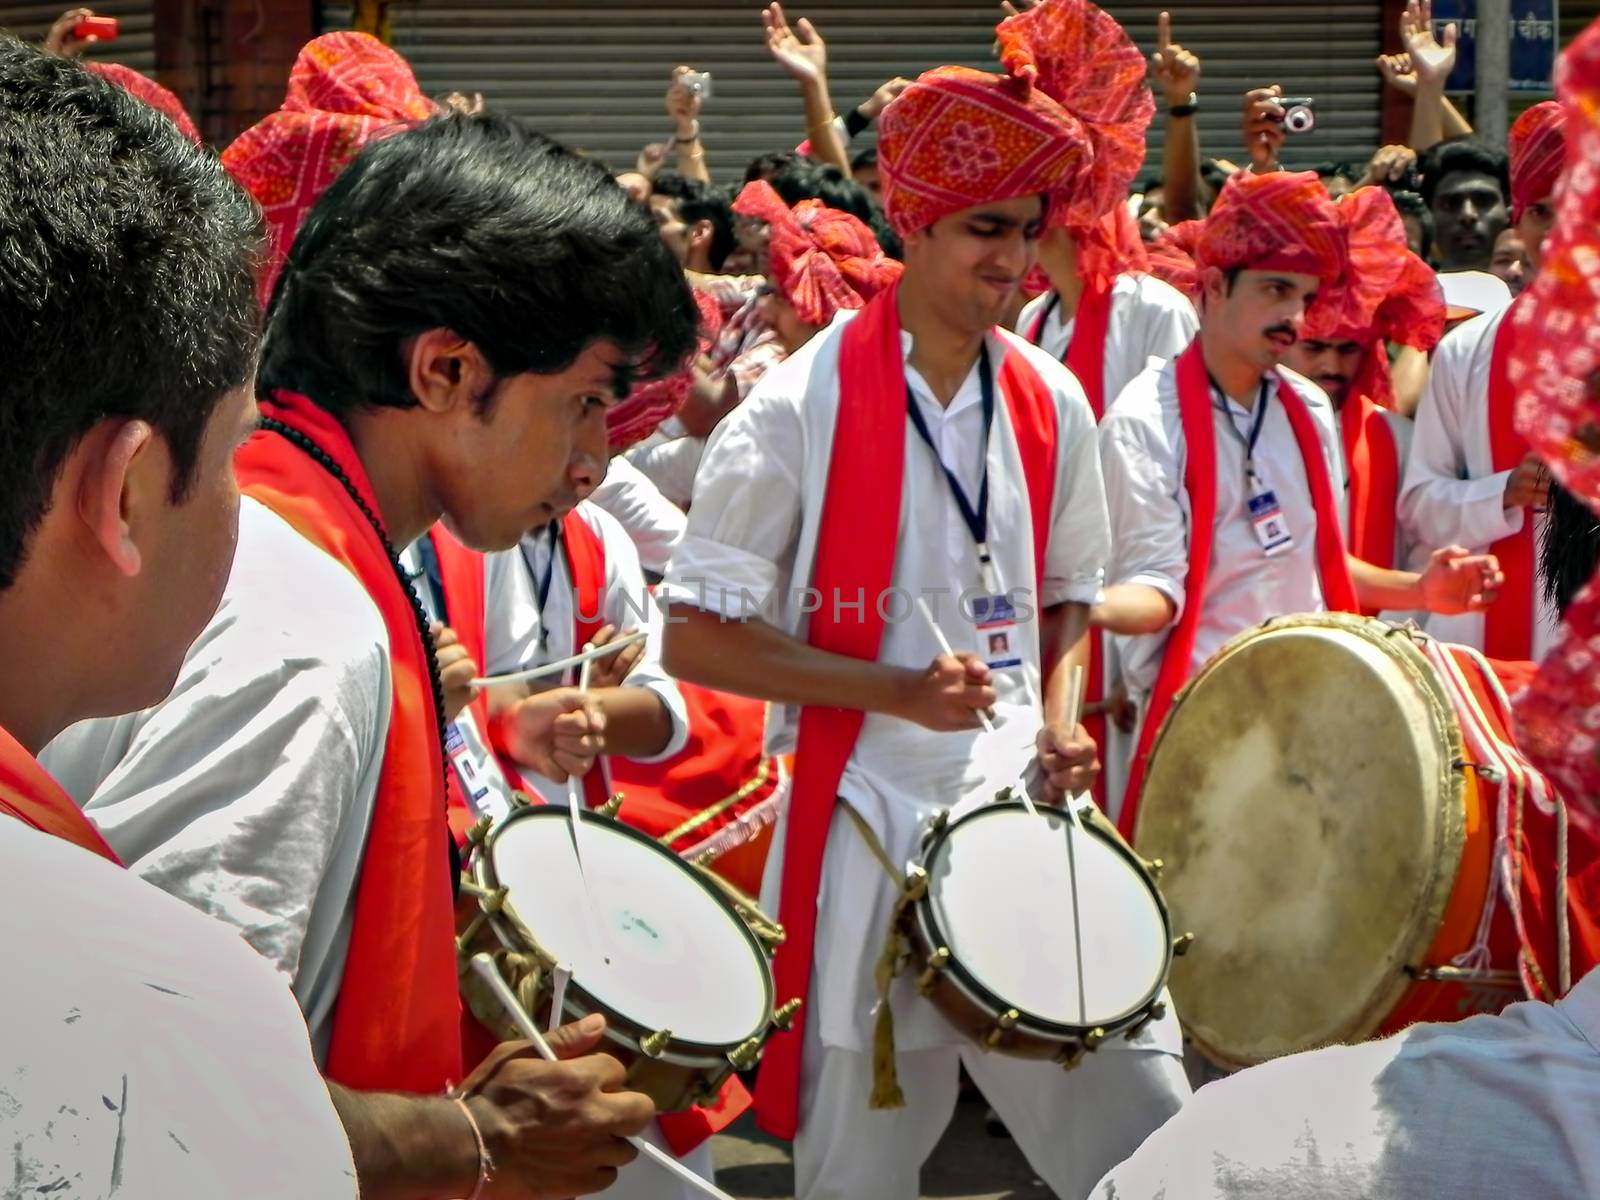 Pune,Maharashtra,India-September 22nd,2010: Group of youths beating traditional dhol & tasha collectively during festival procession of ganesh as people in crowd watch.